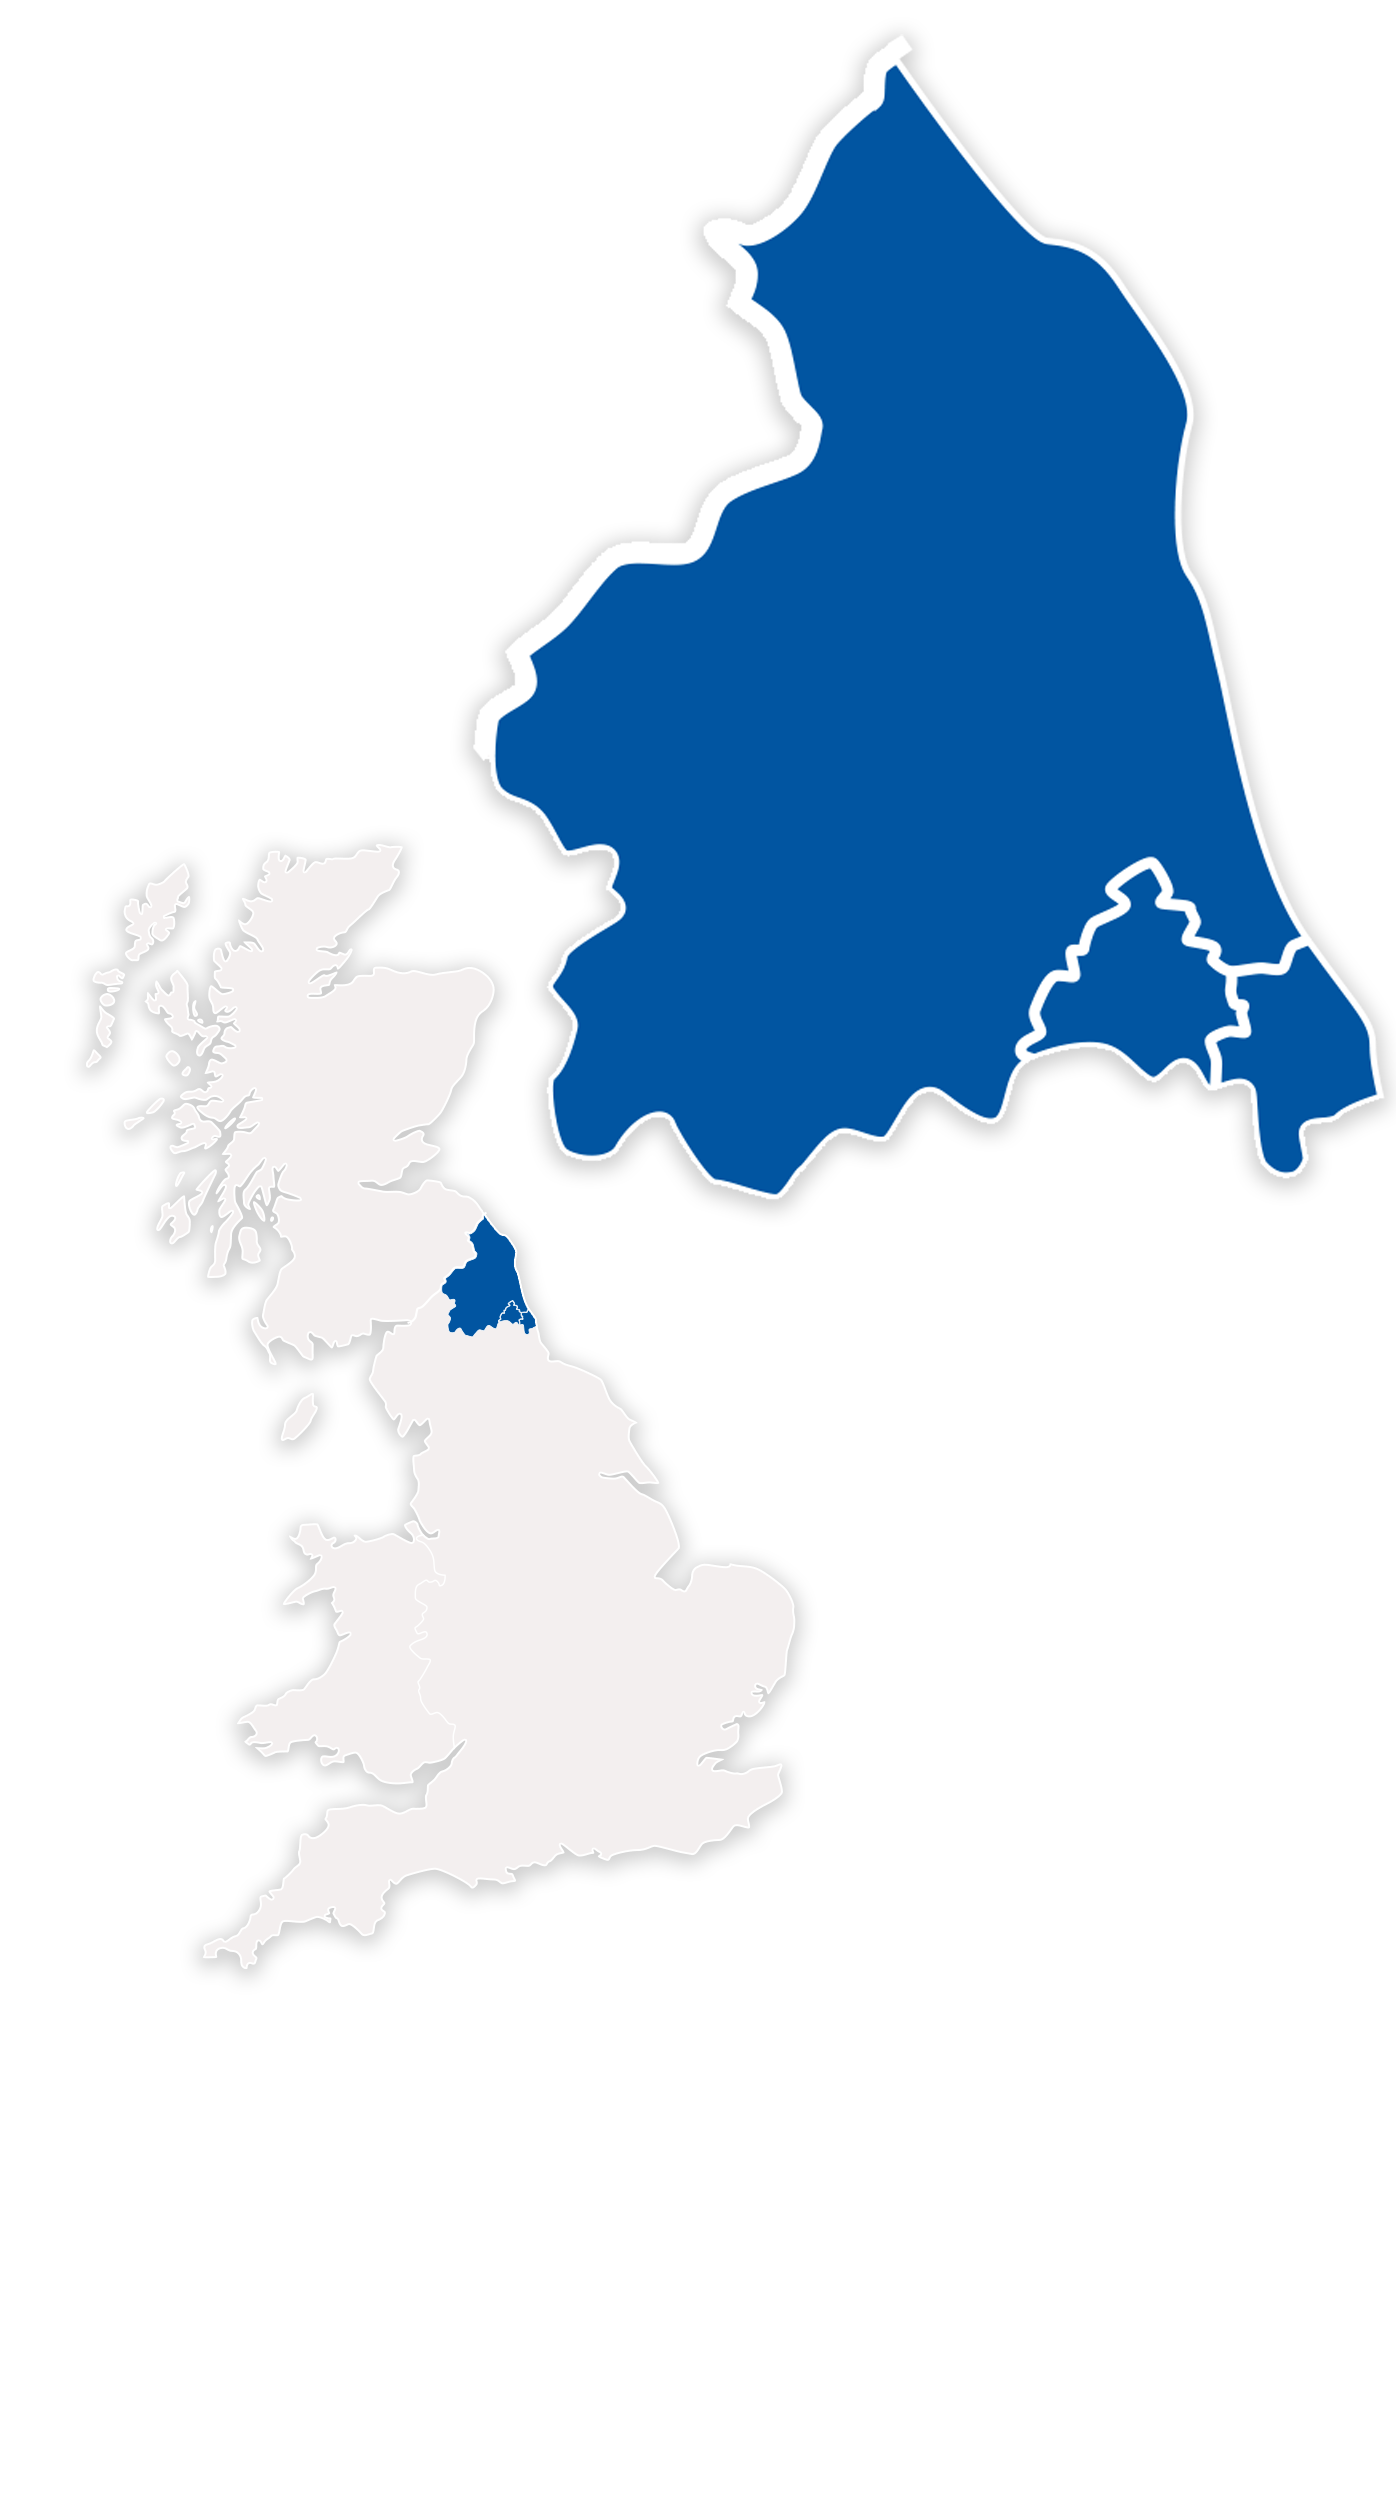 Image of Northumbria Police Area on map of UK